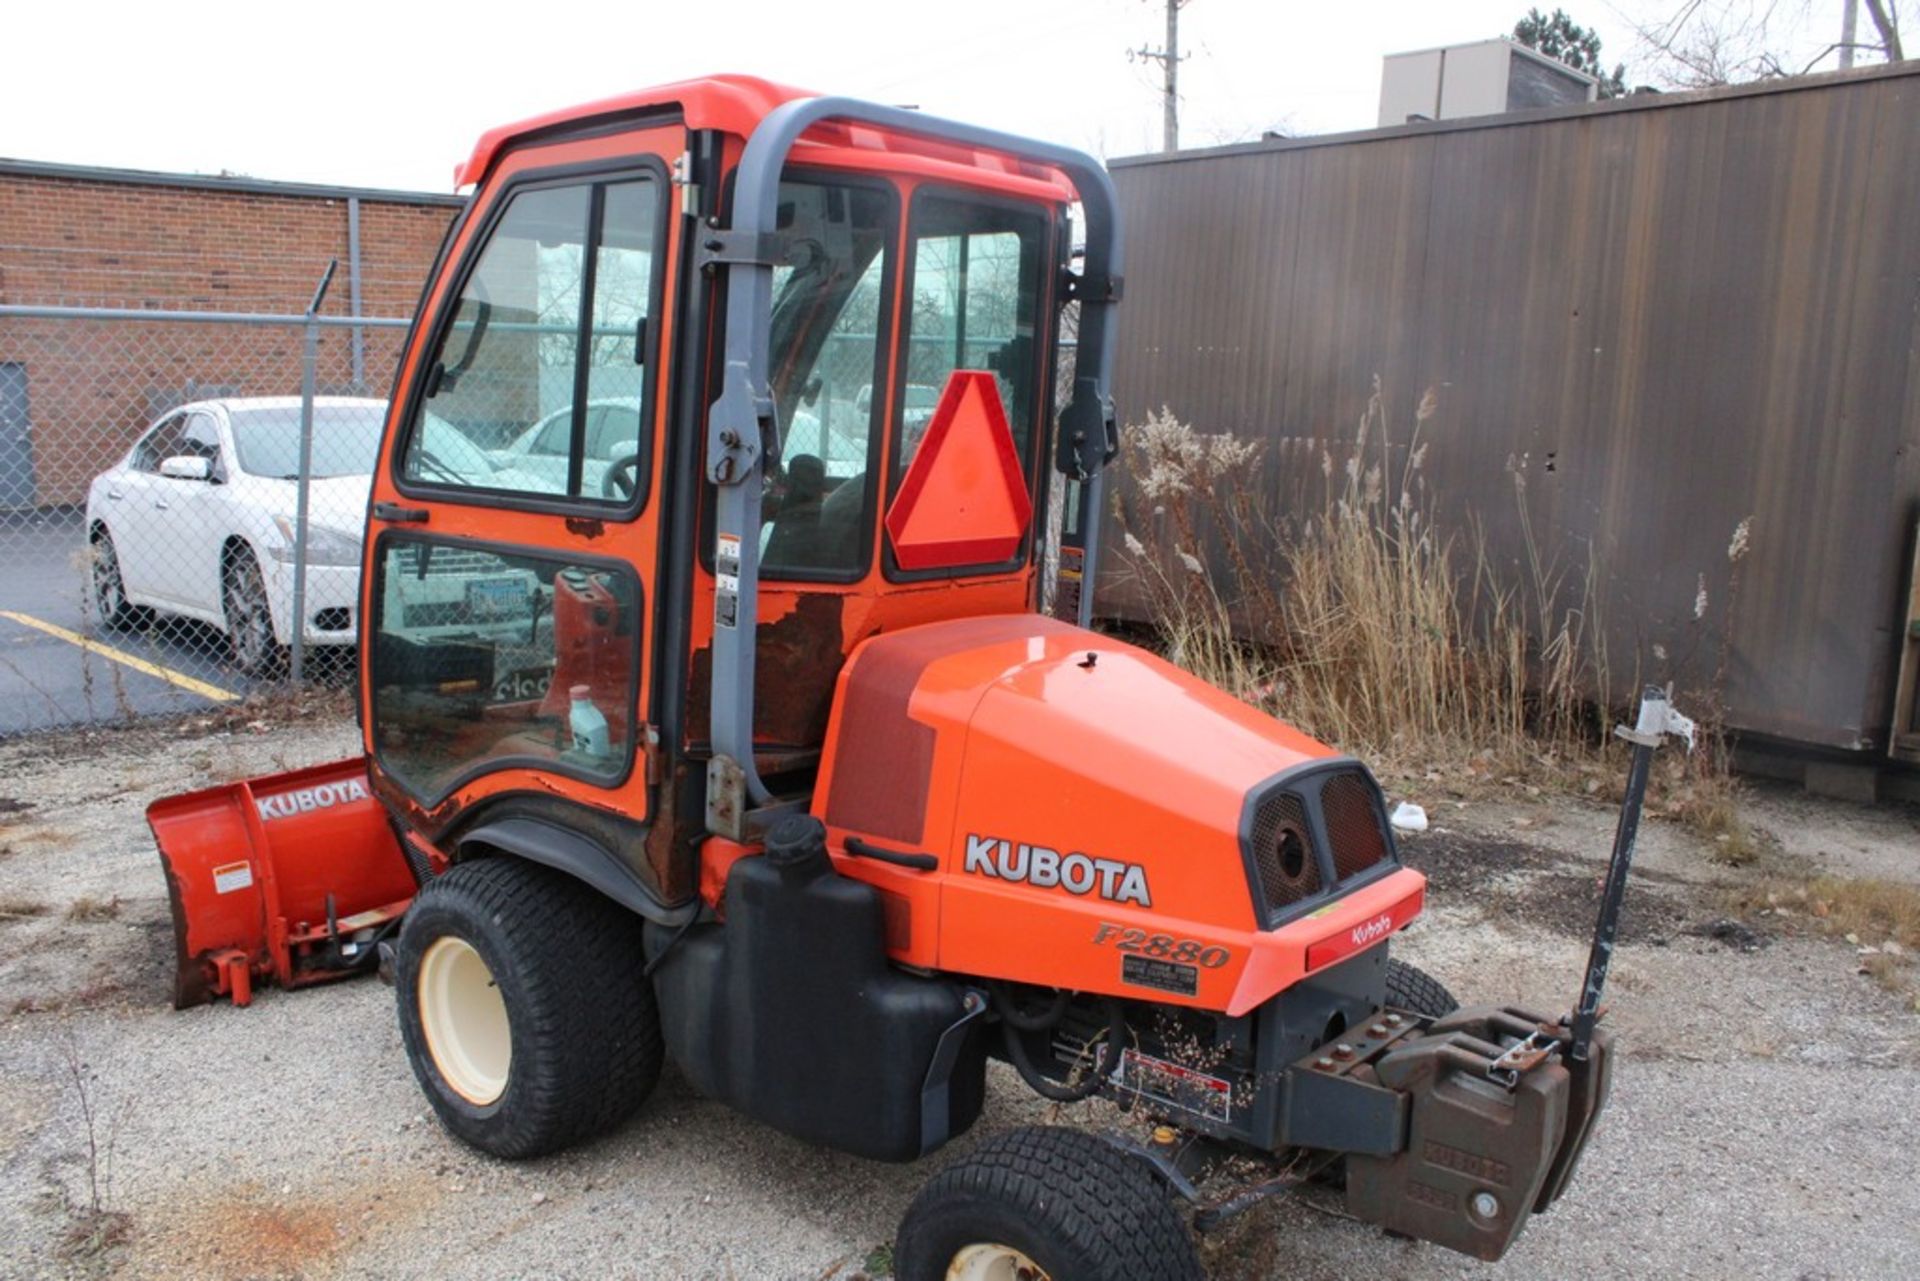 KOBOTA MODEL F2880, 2WD, 28HP, S/N 11032, WITH SNOW PLOW ATTACHMENT - Image 7 of 13